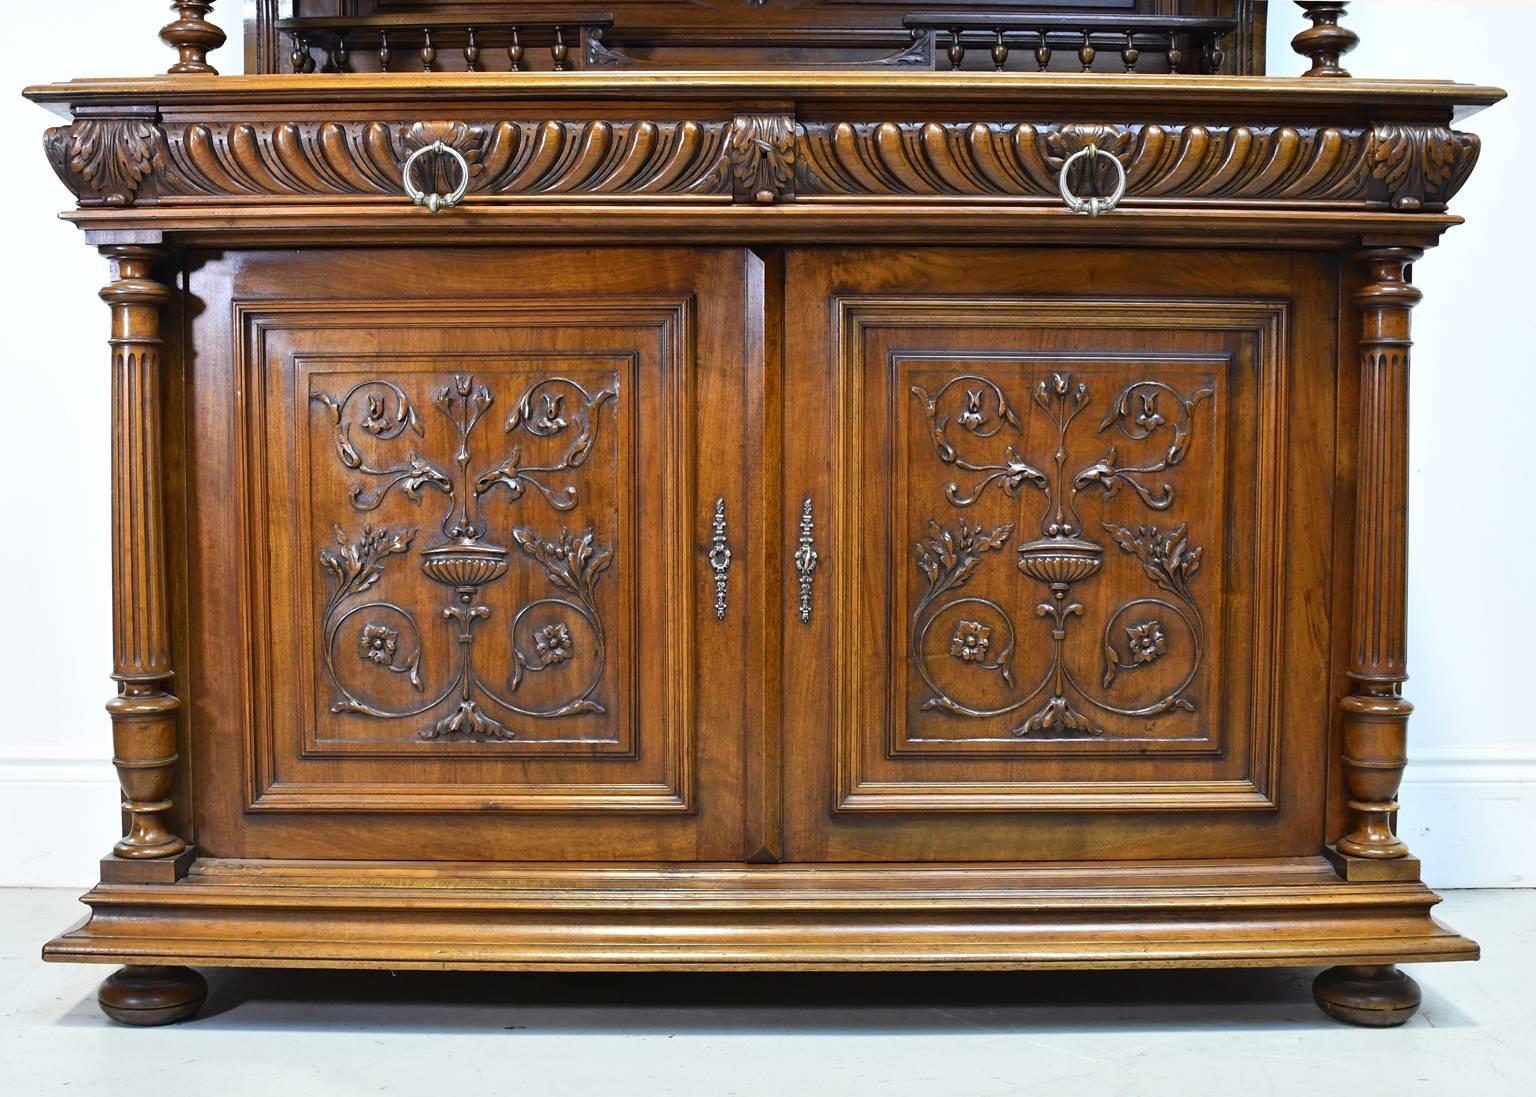 Renaissance Revival 19th Century French Renaissance-Style Buffet a Deux Corps in Walnut For Sale